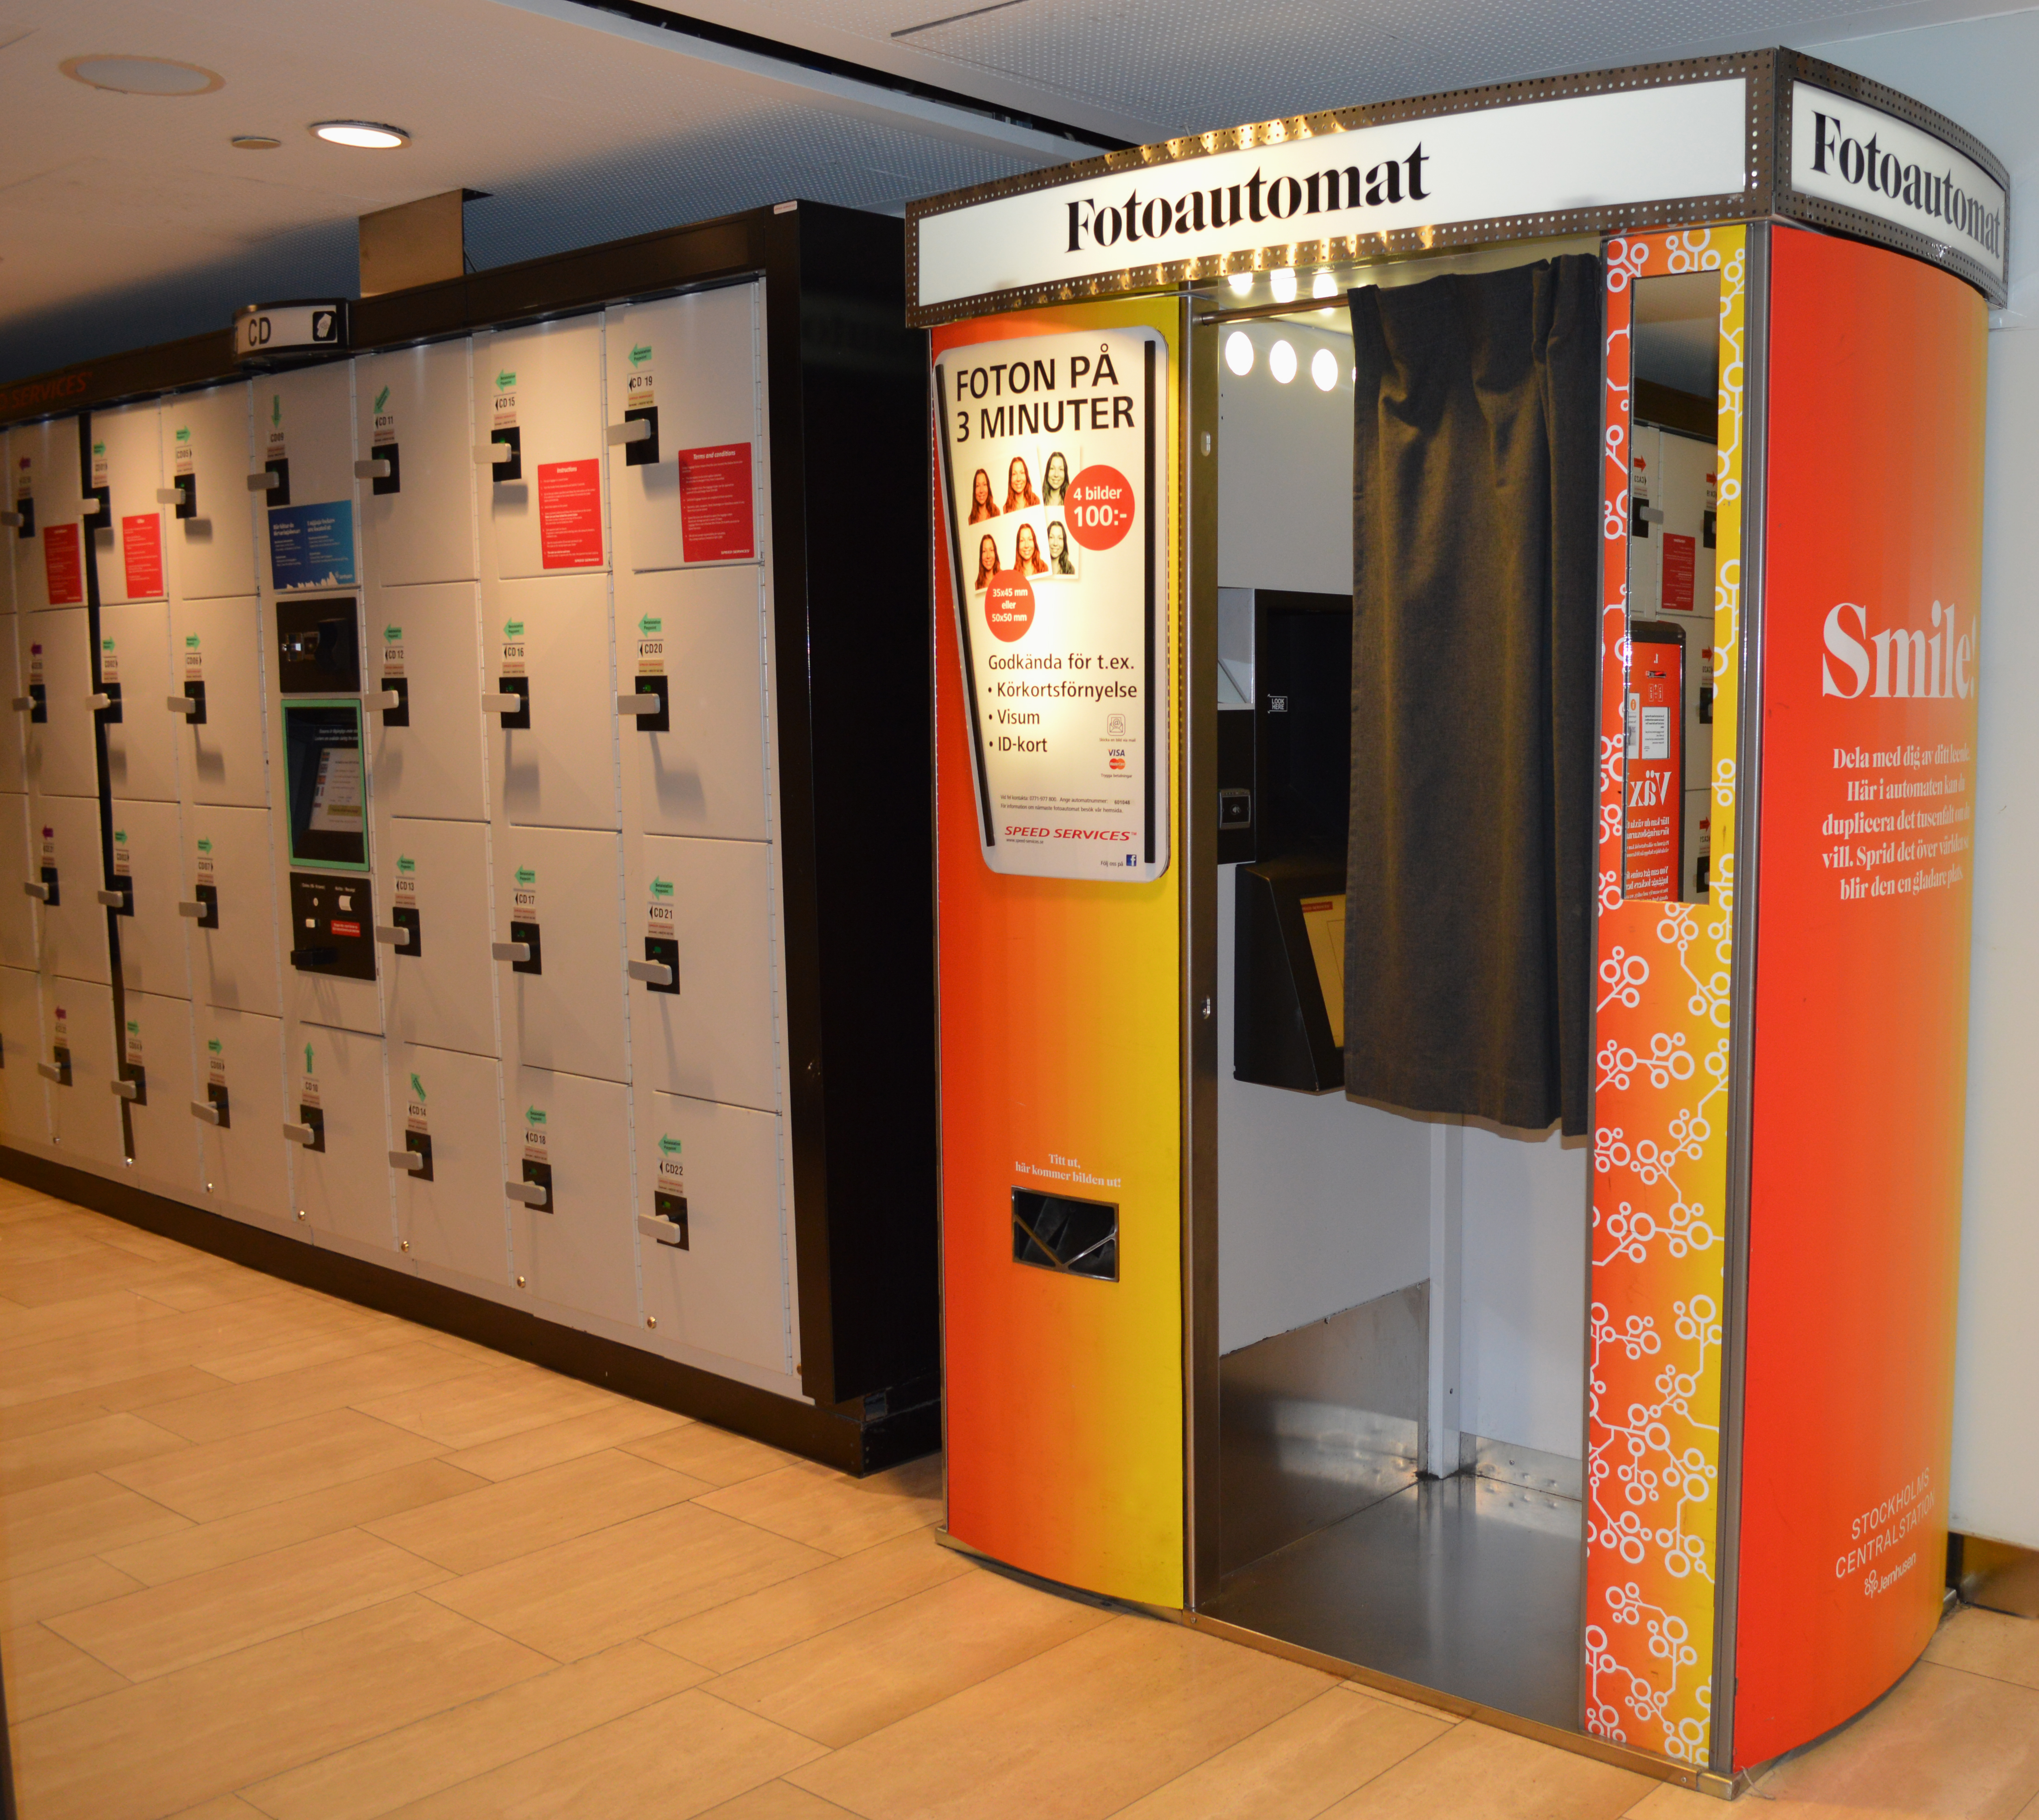 Photo booth and storage lockers at Stockholm central railway station